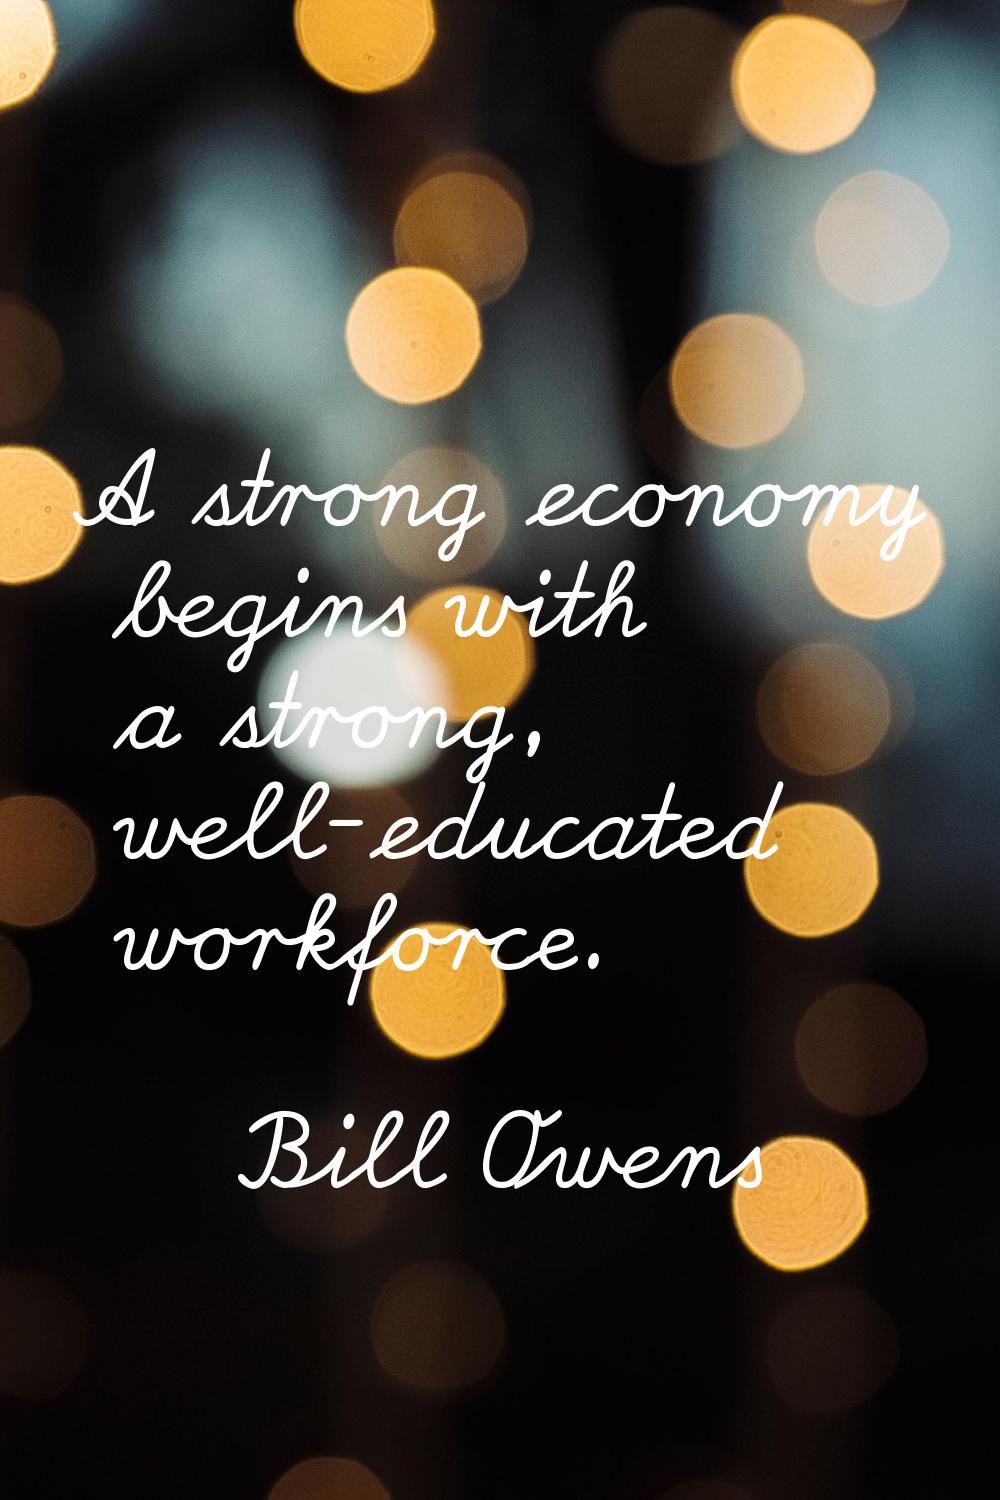 A strong economy begins with a strong, well-educated workforce.